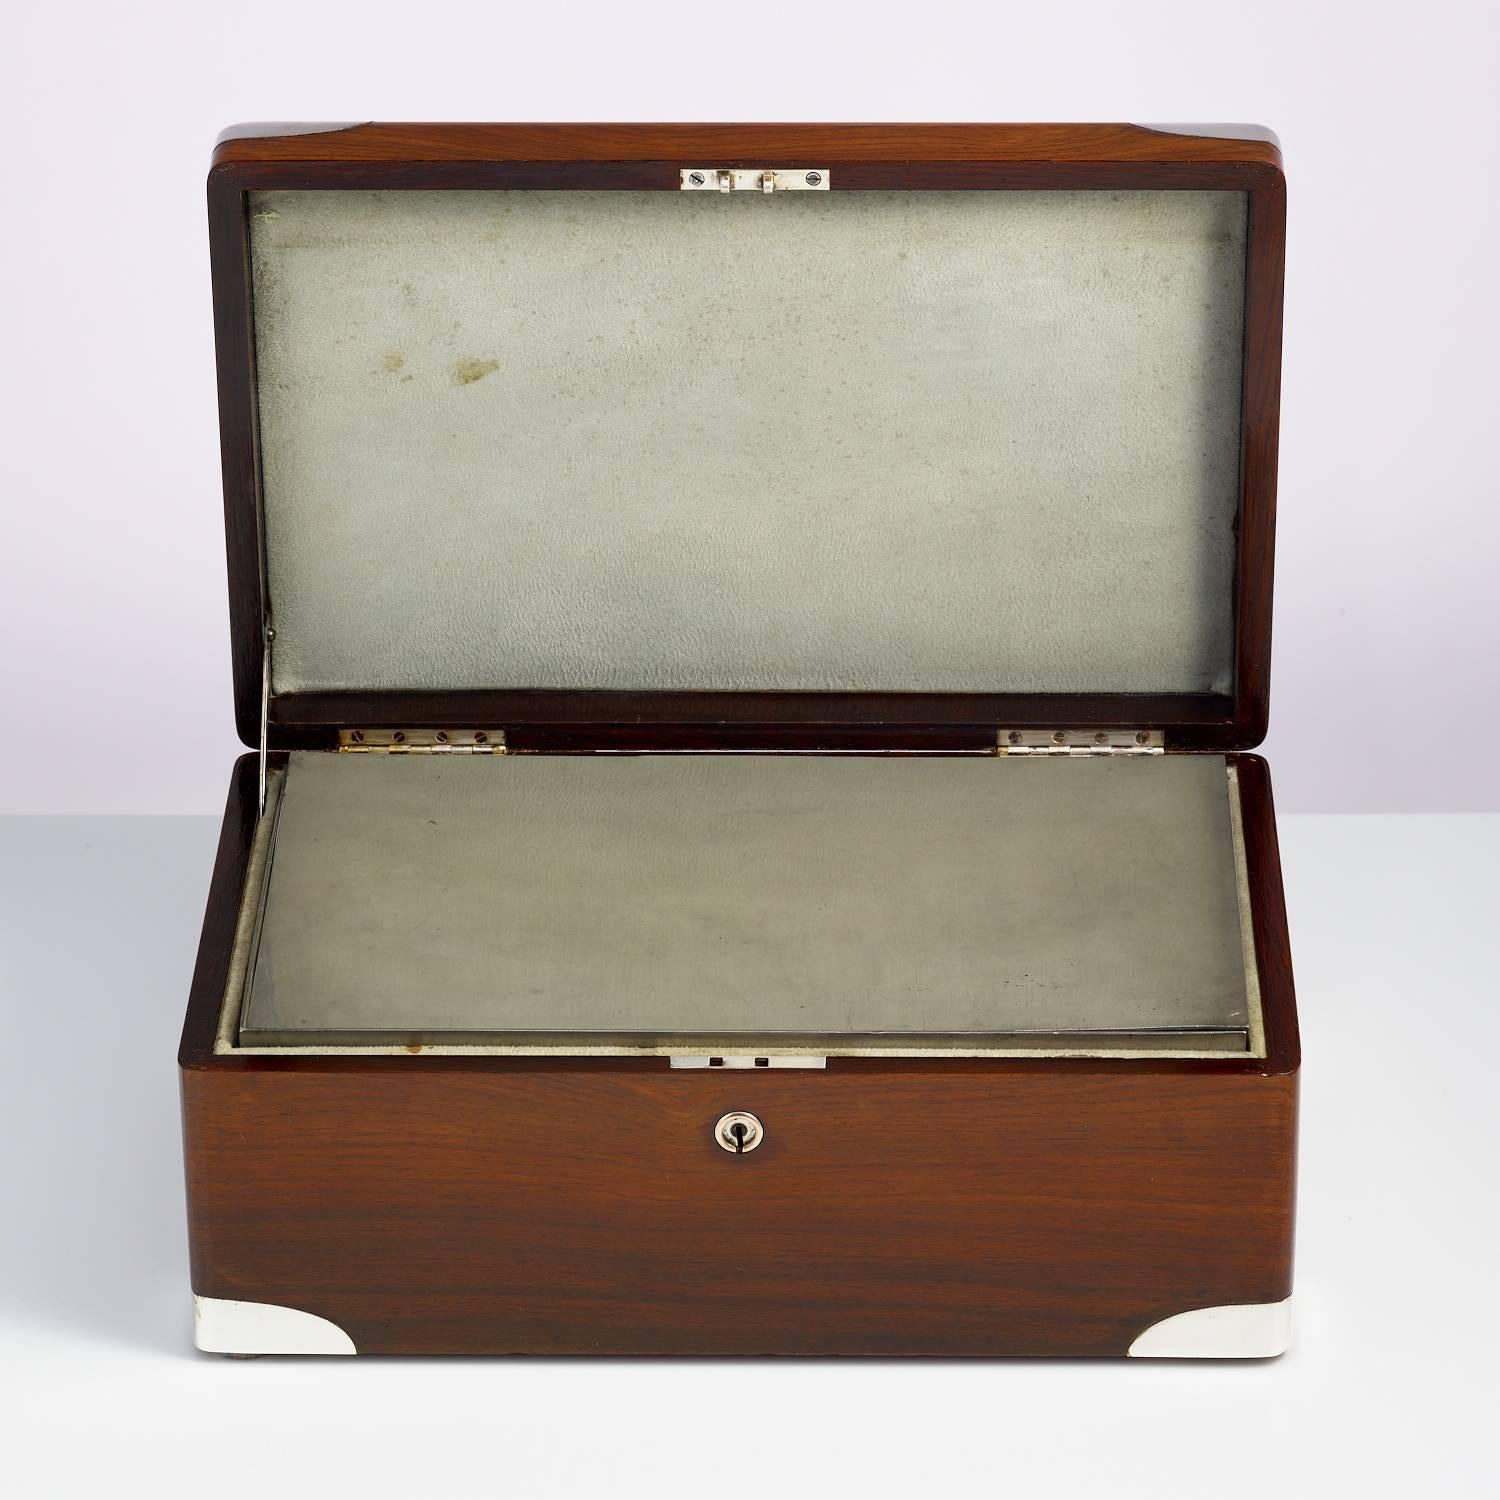 An early 20th century walnut cigar Humidor, circa 1900 with sterling silver corners and nameplate.
This piece has a campaign feel the corners are perfectly moulded.
The walls of the box have a inner insulation felt. There is a separate zinc alloy